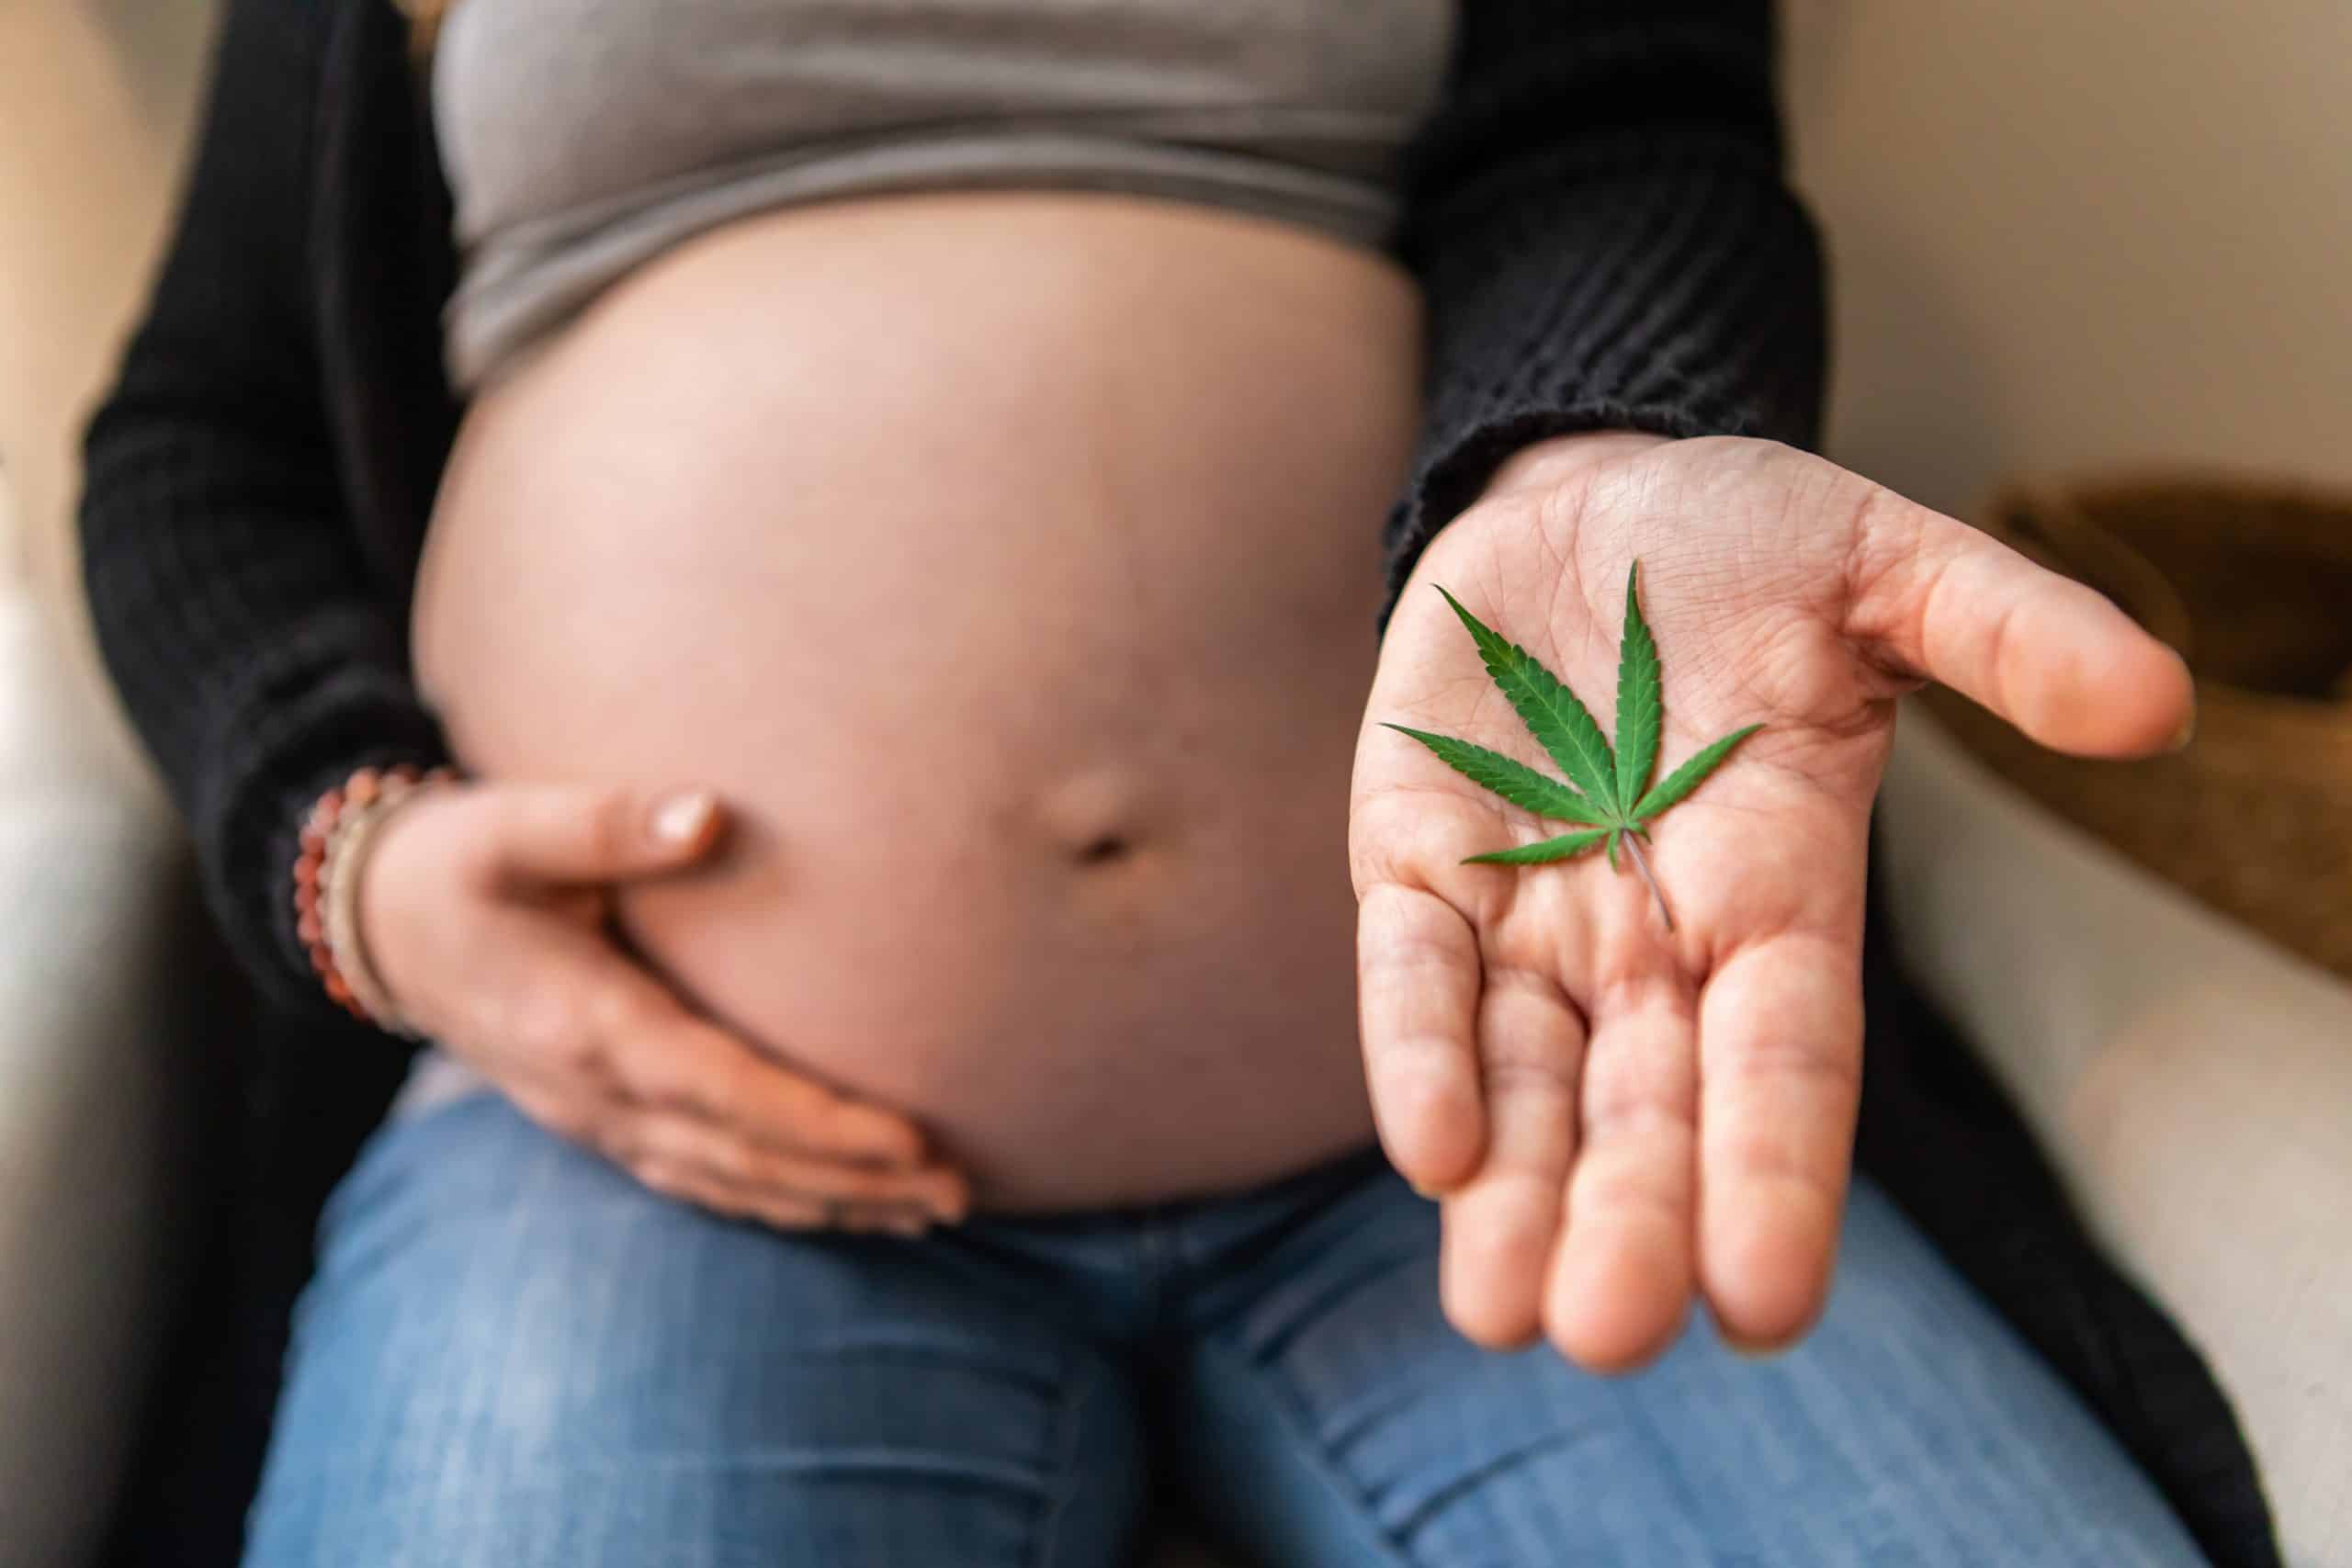 Does Cannabis Have a Negative Impact on Fertility